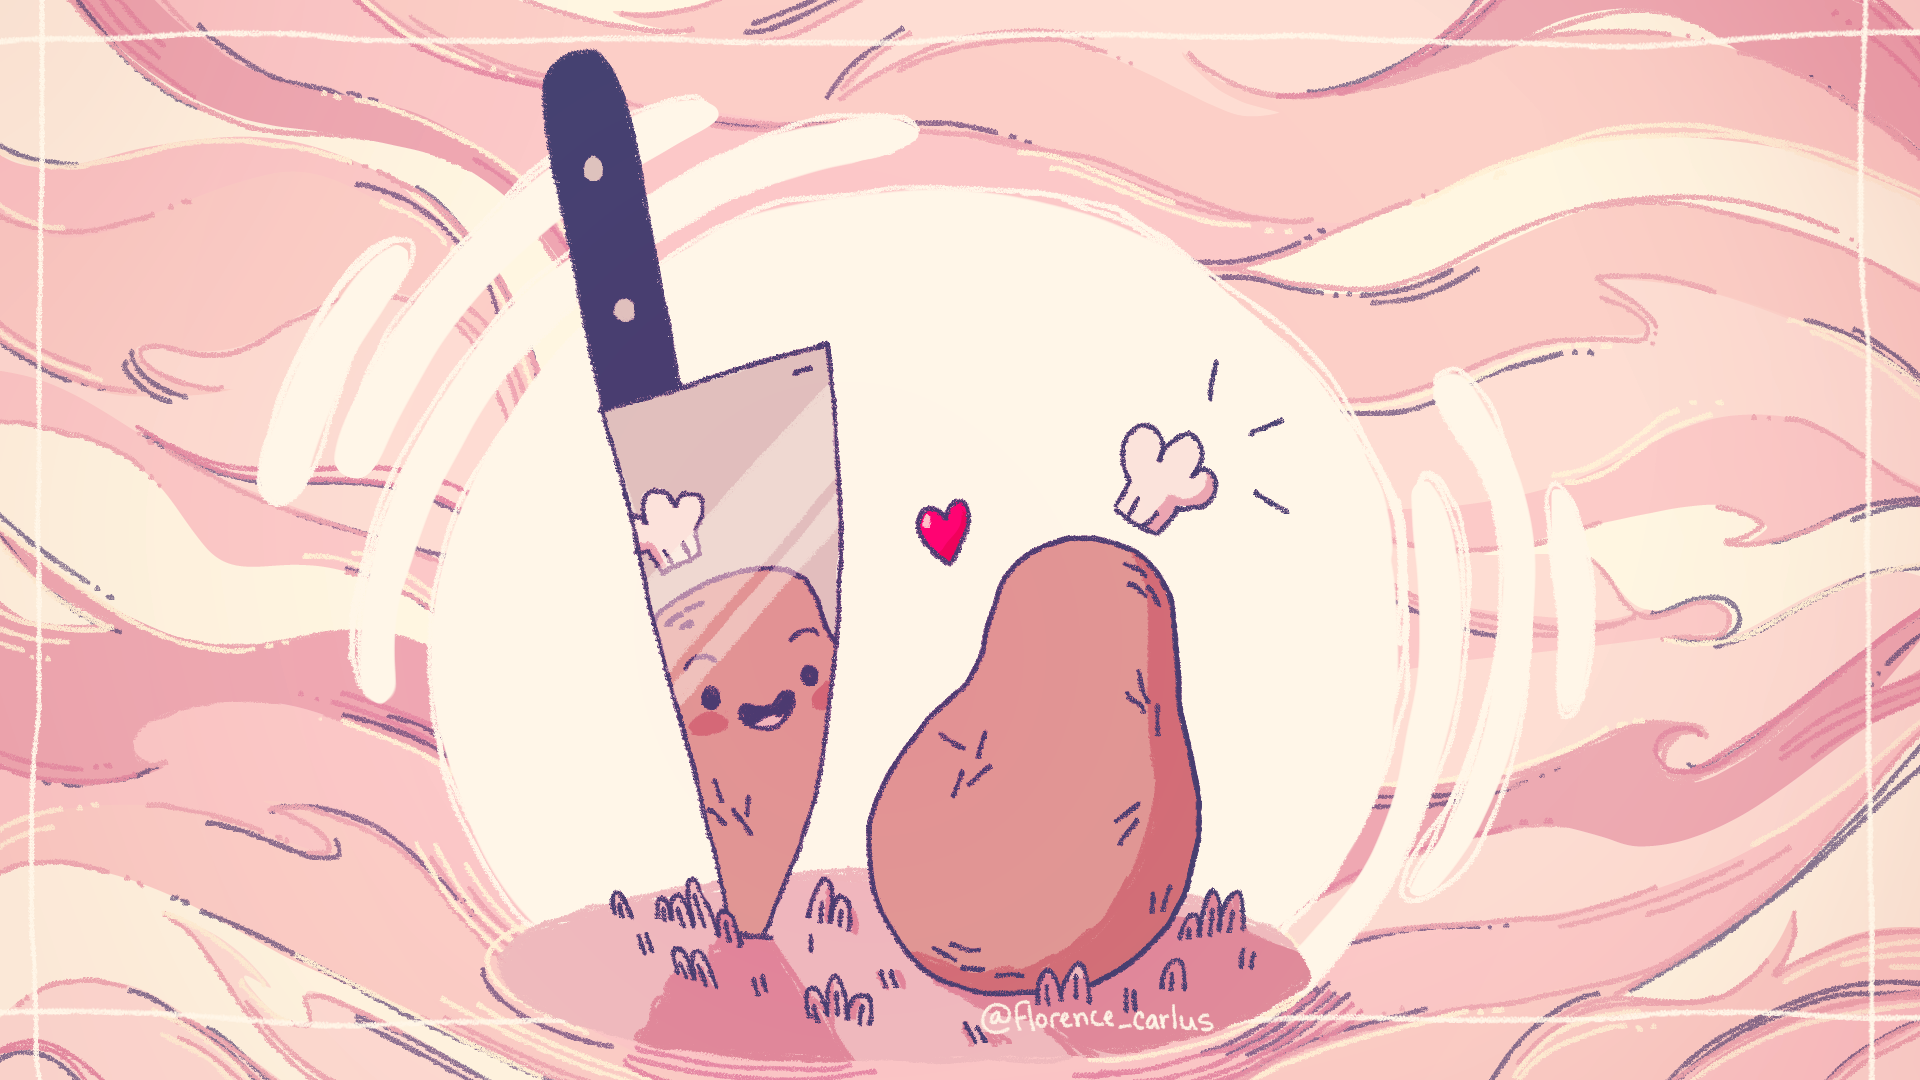 A drawing of a potato with a face and a tiny chef hat, looking at their reflection in a knife blade with joy